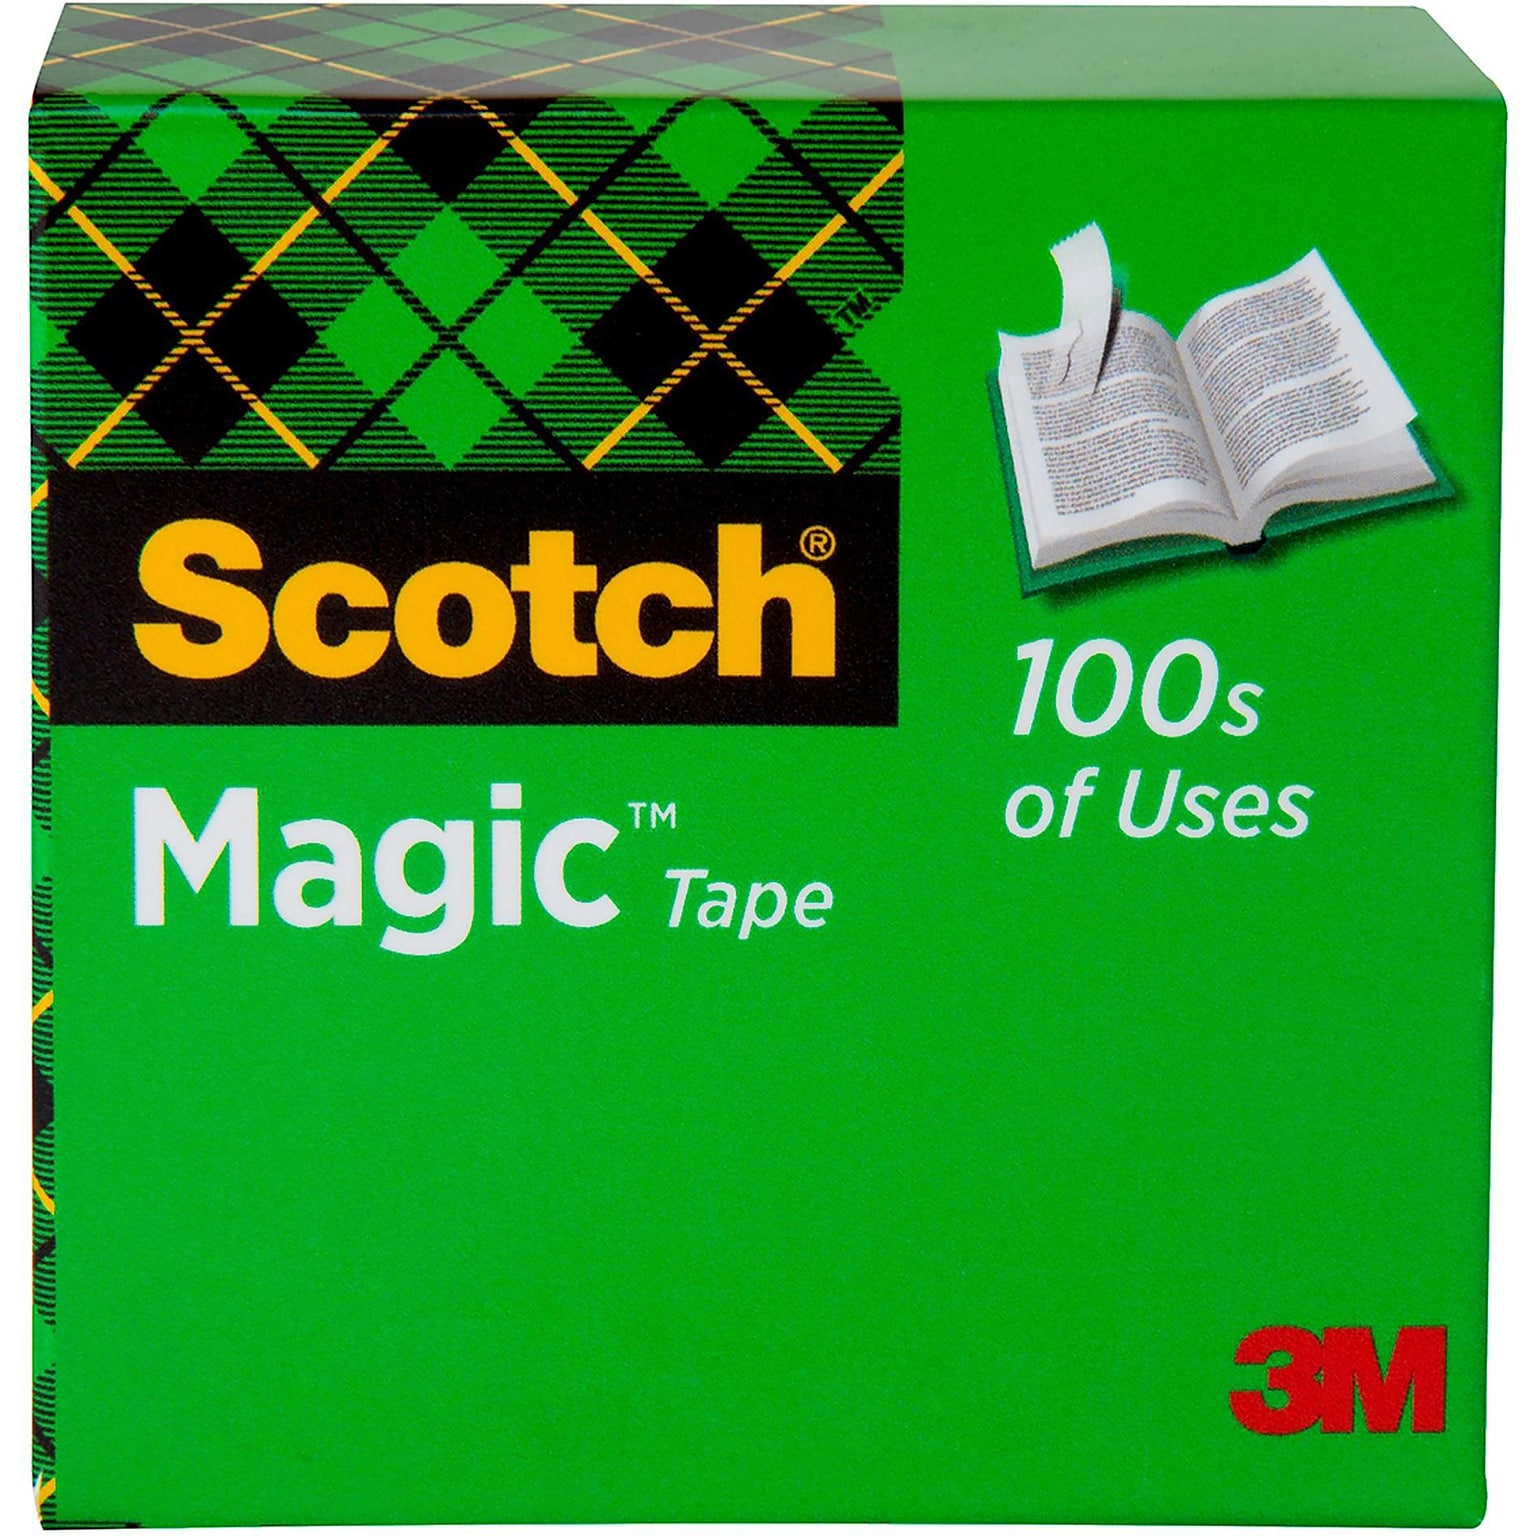 Scotch Magic Tape, Invisible, 1/2 in x 1296 in, 12 Tape Rolls, Clear, Refill, Home Office and Back to School Classroom Supplies